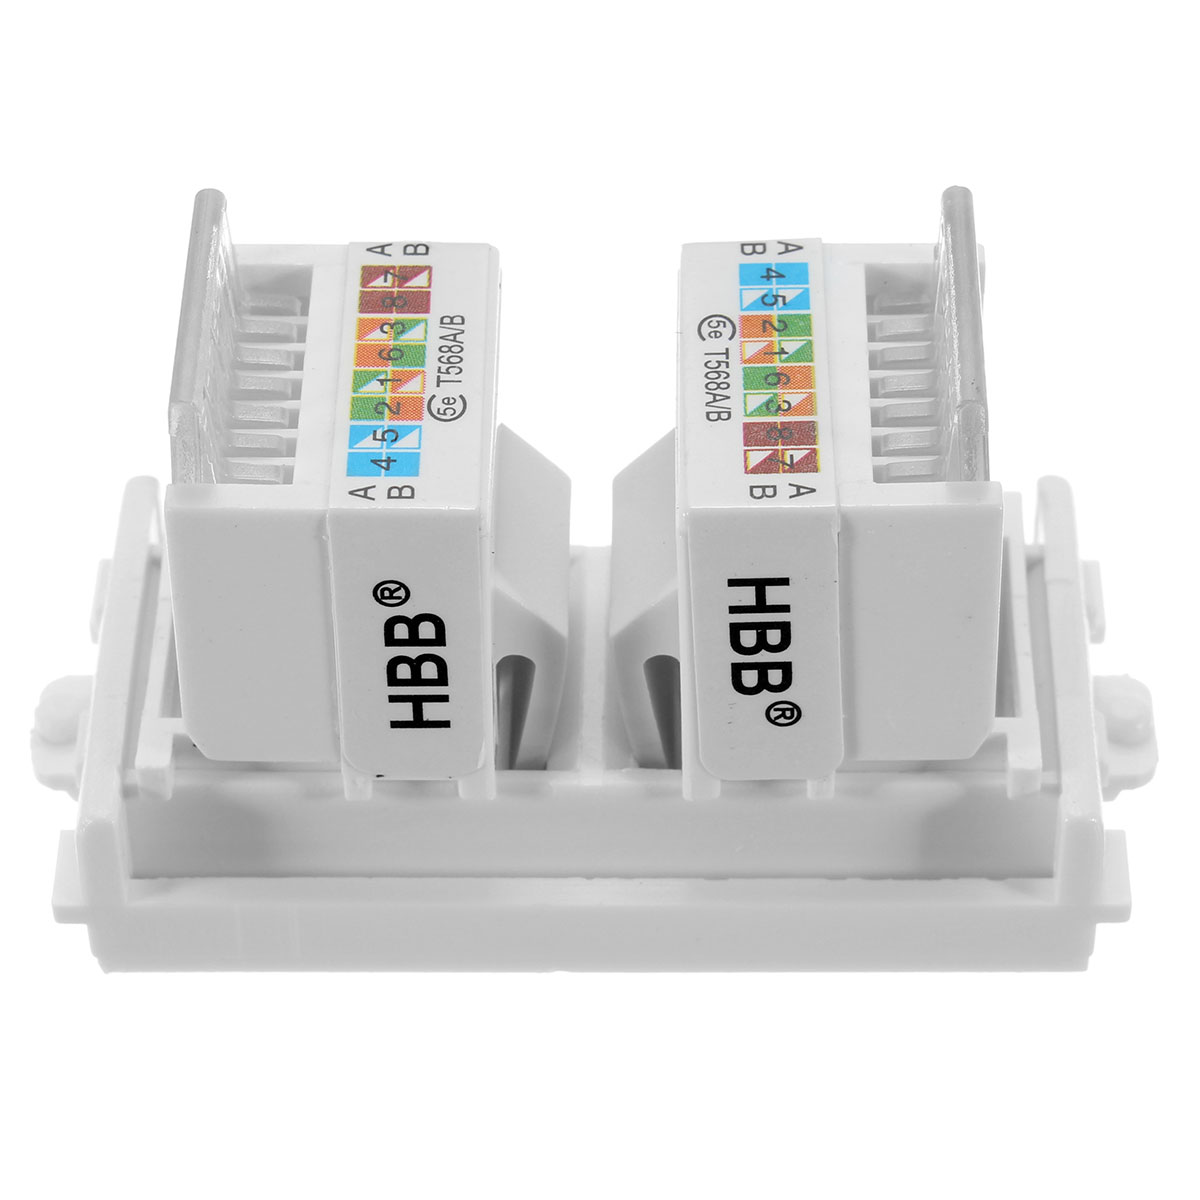 RJ45-Wall-Plate-Dual-Port-Socket-Panel-Building-Materials-Network-Combination-Connector-Module-1401148-6